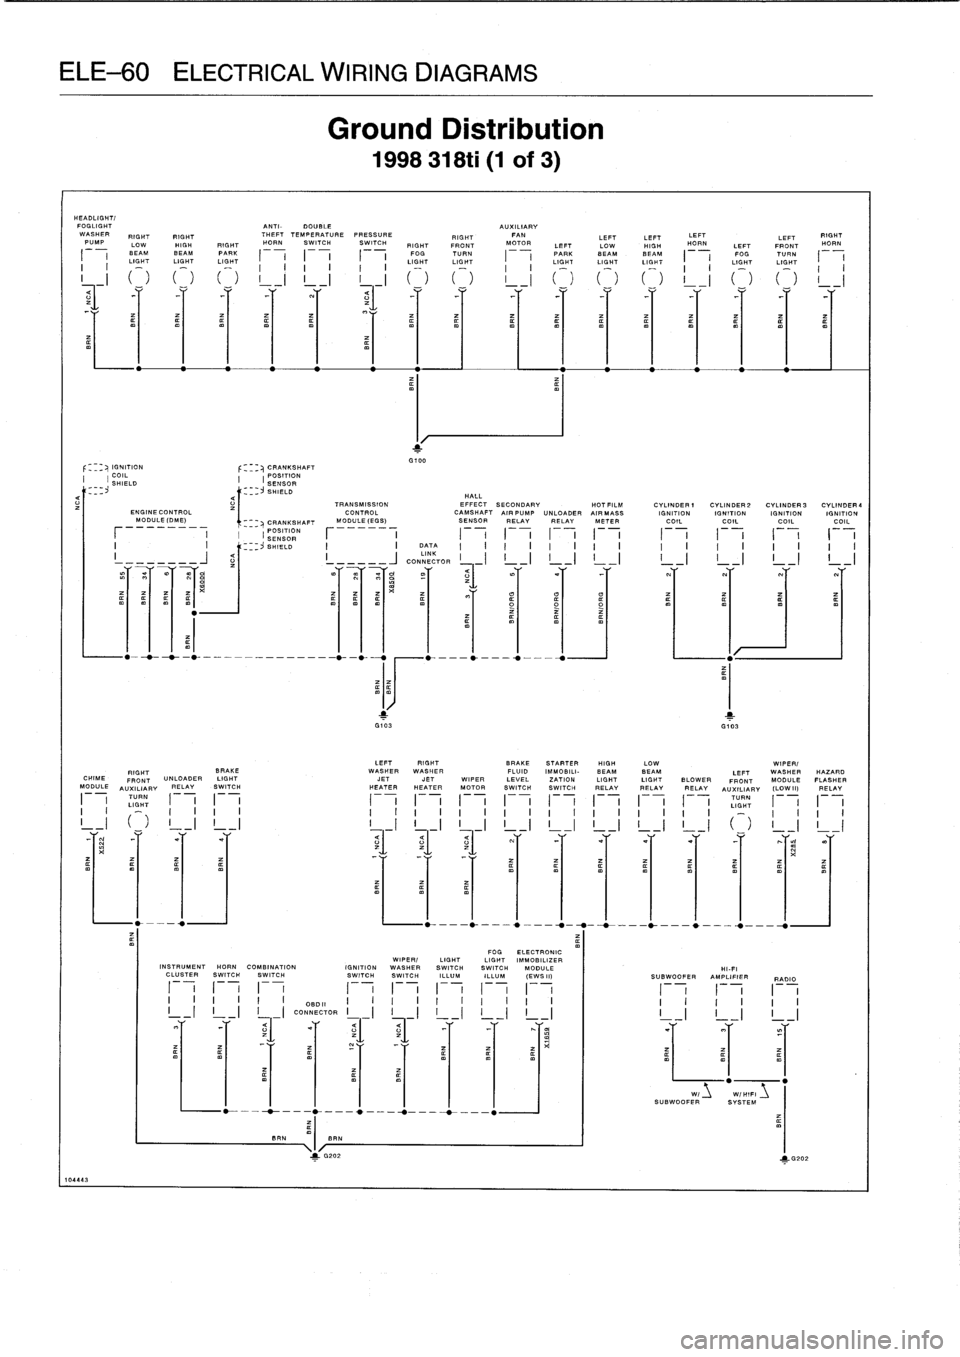 BMW 328i 1998 E36 Service Manual 
ELE-60
ELECTRICAL
WIRING
DIAGRAMS

HEADLIGHT/
FOGLIGHT

	

ANTI-
DOUBLE

	

AUXILIARY
WASHER

	

RIGHT

	

RIGHT

	

THEFT
TEMPERATURE
PRESSURE

	

RIGHT

	

FAN

	

LEFT

	

LEFT

	

LEFT

	

LEFT

